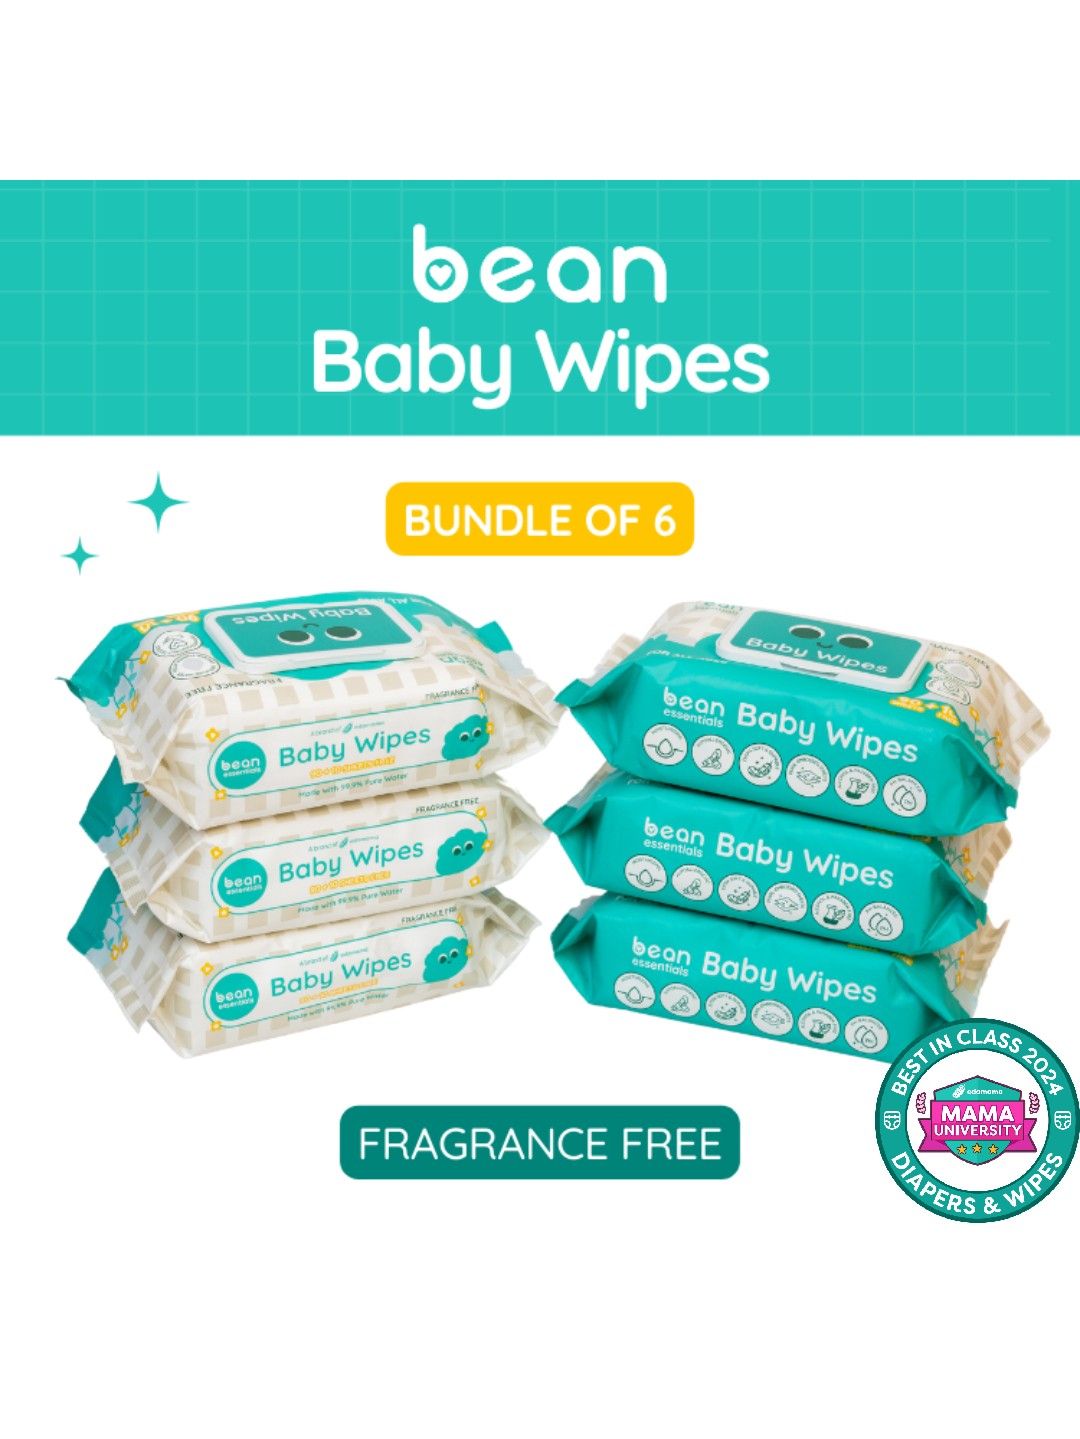 bean essentials [Bundle of 6] Baby Wipes Fragrance Free 6 x 100 sheets